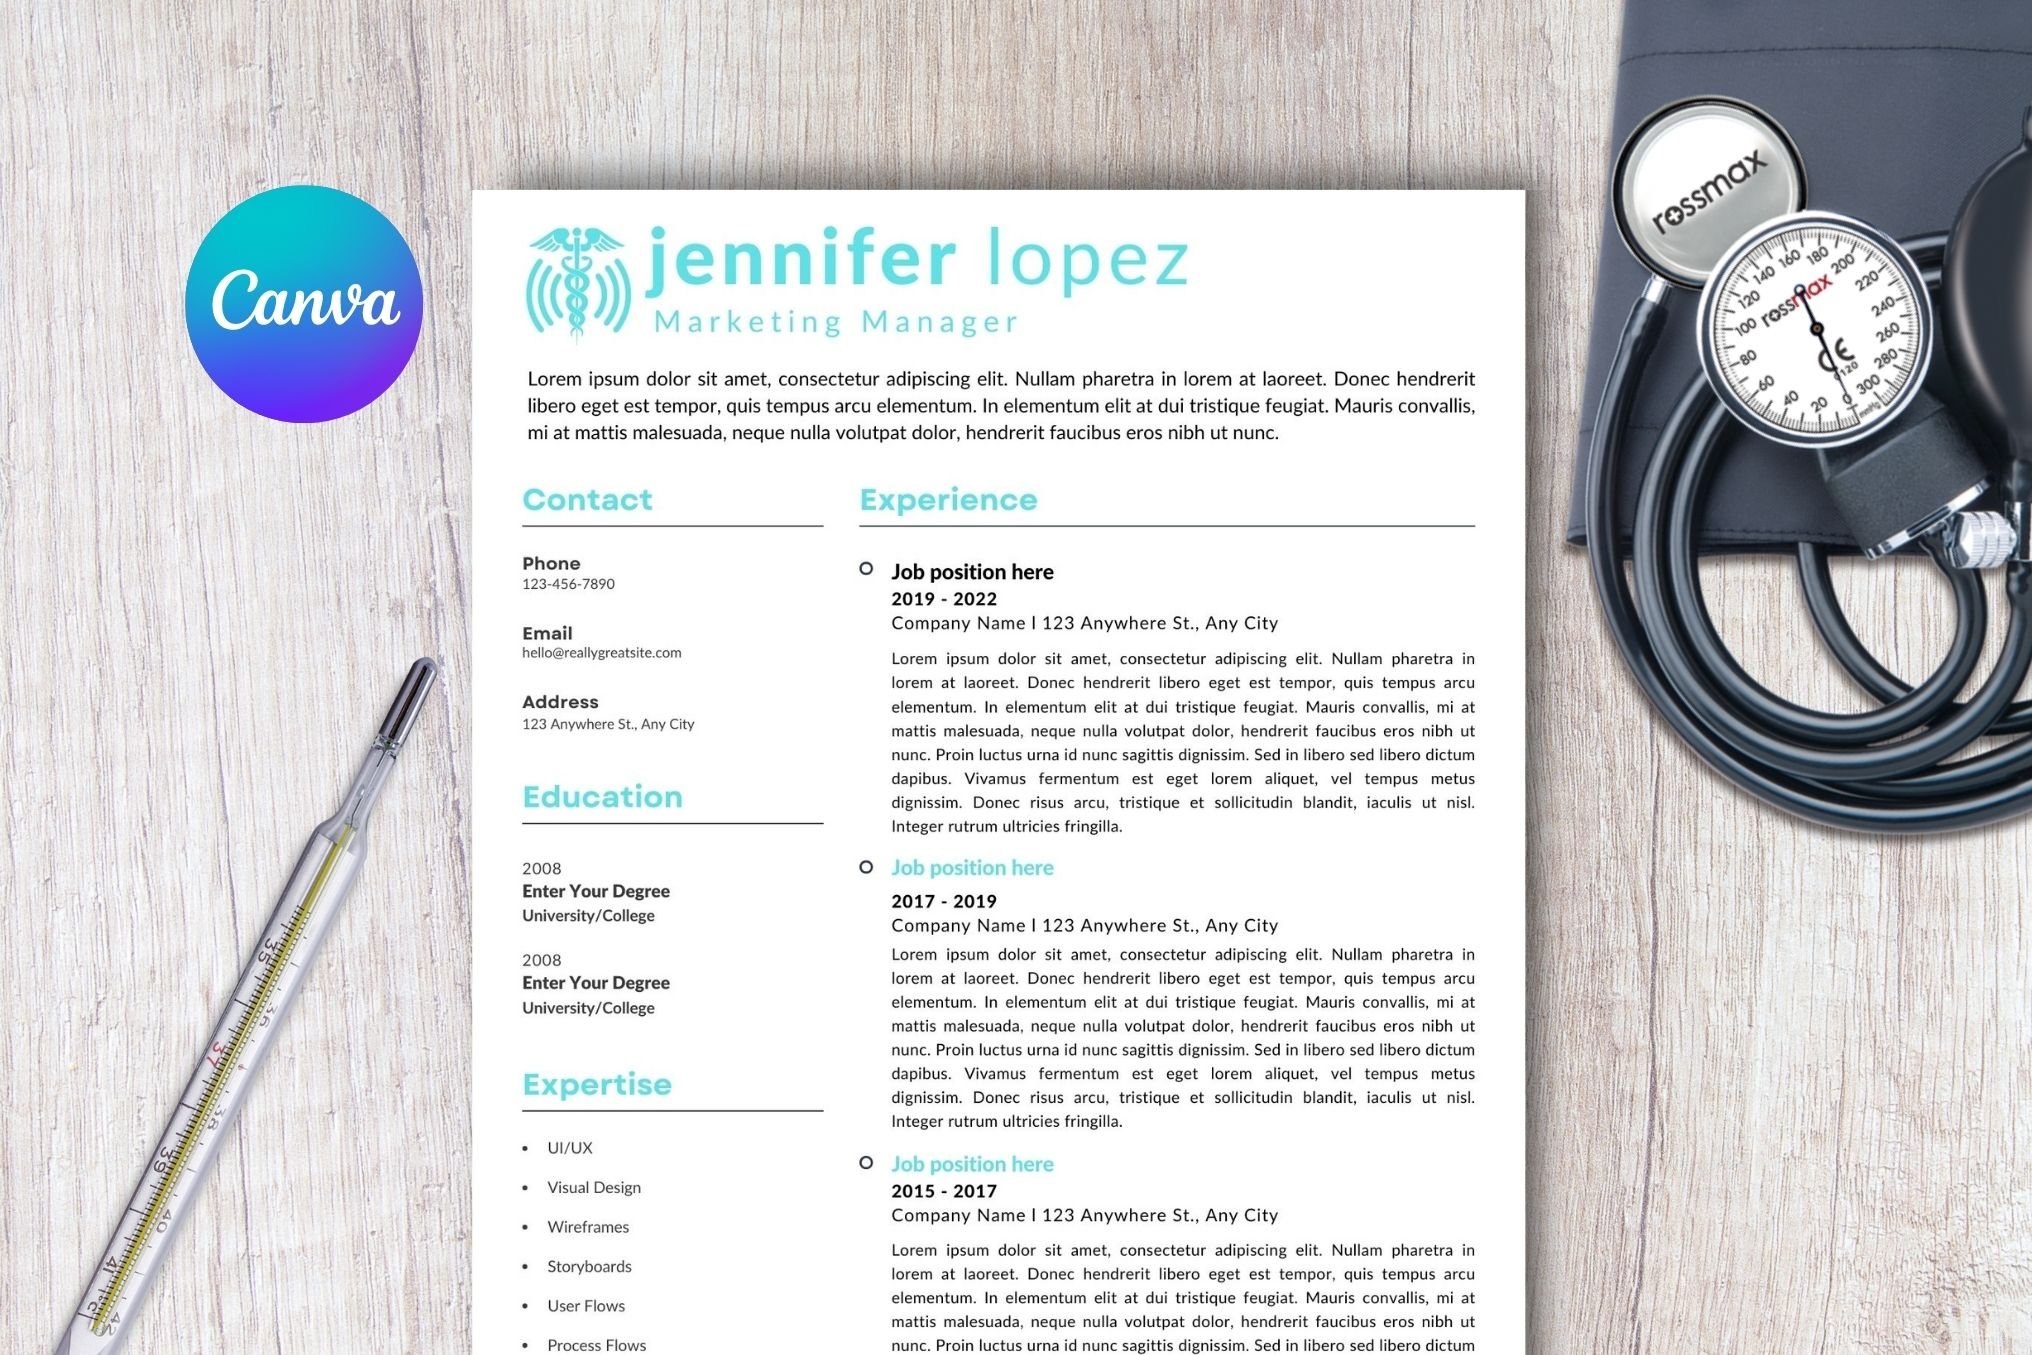 Doctor resume with a stethoscope and a stethoscope.